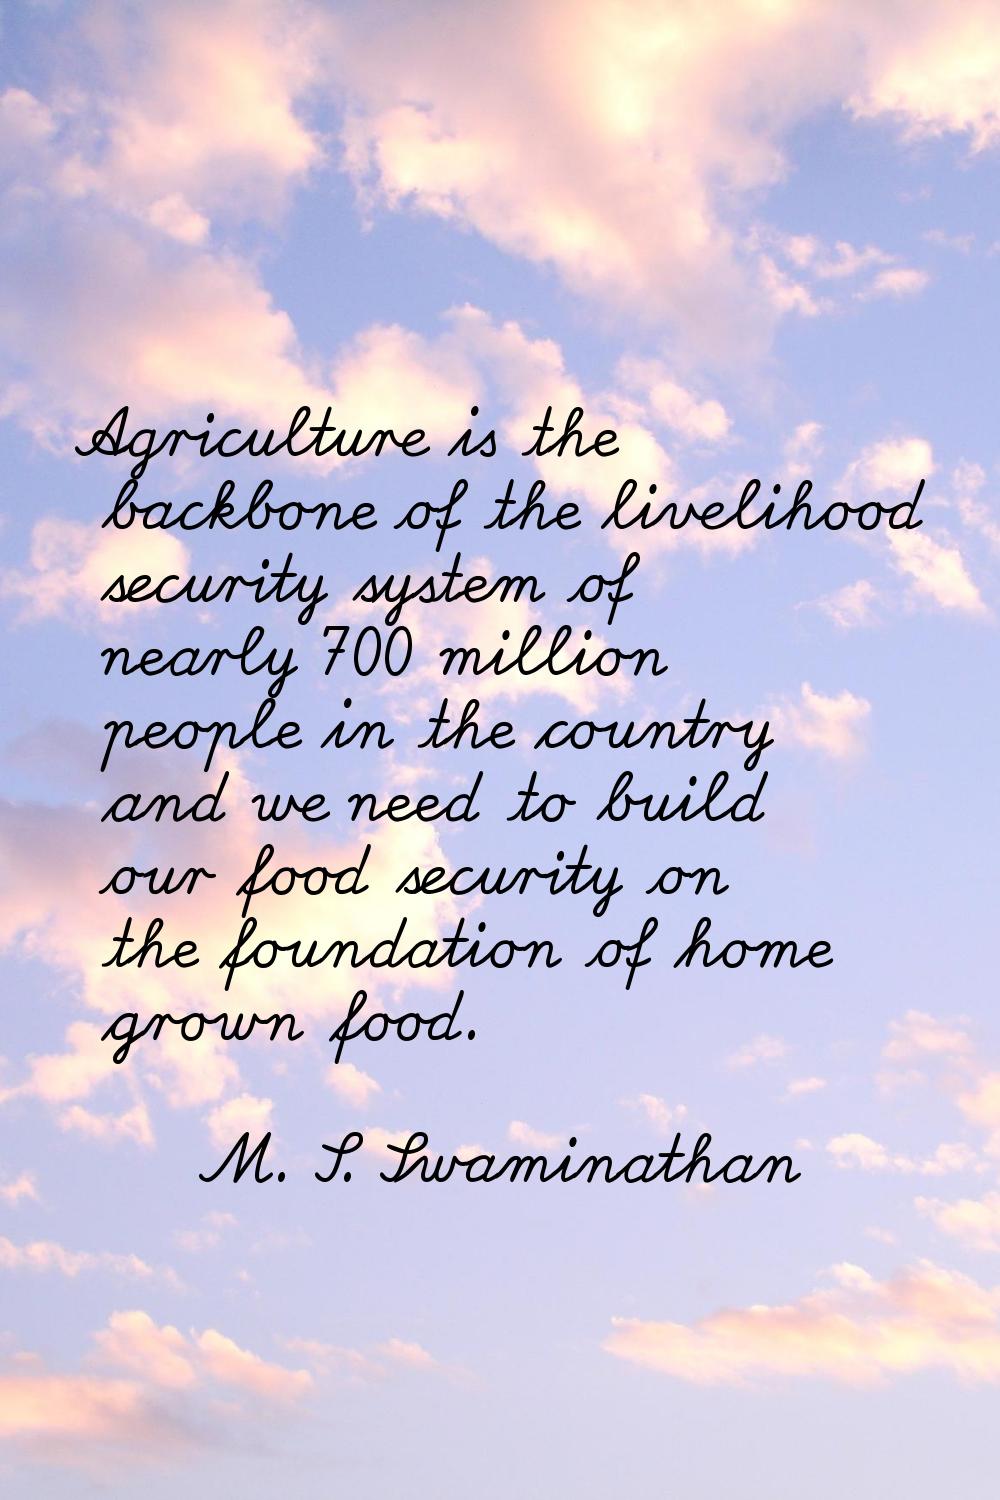 Agriculture is the backbone of the livelihood security system of nearly 700 million people in the c